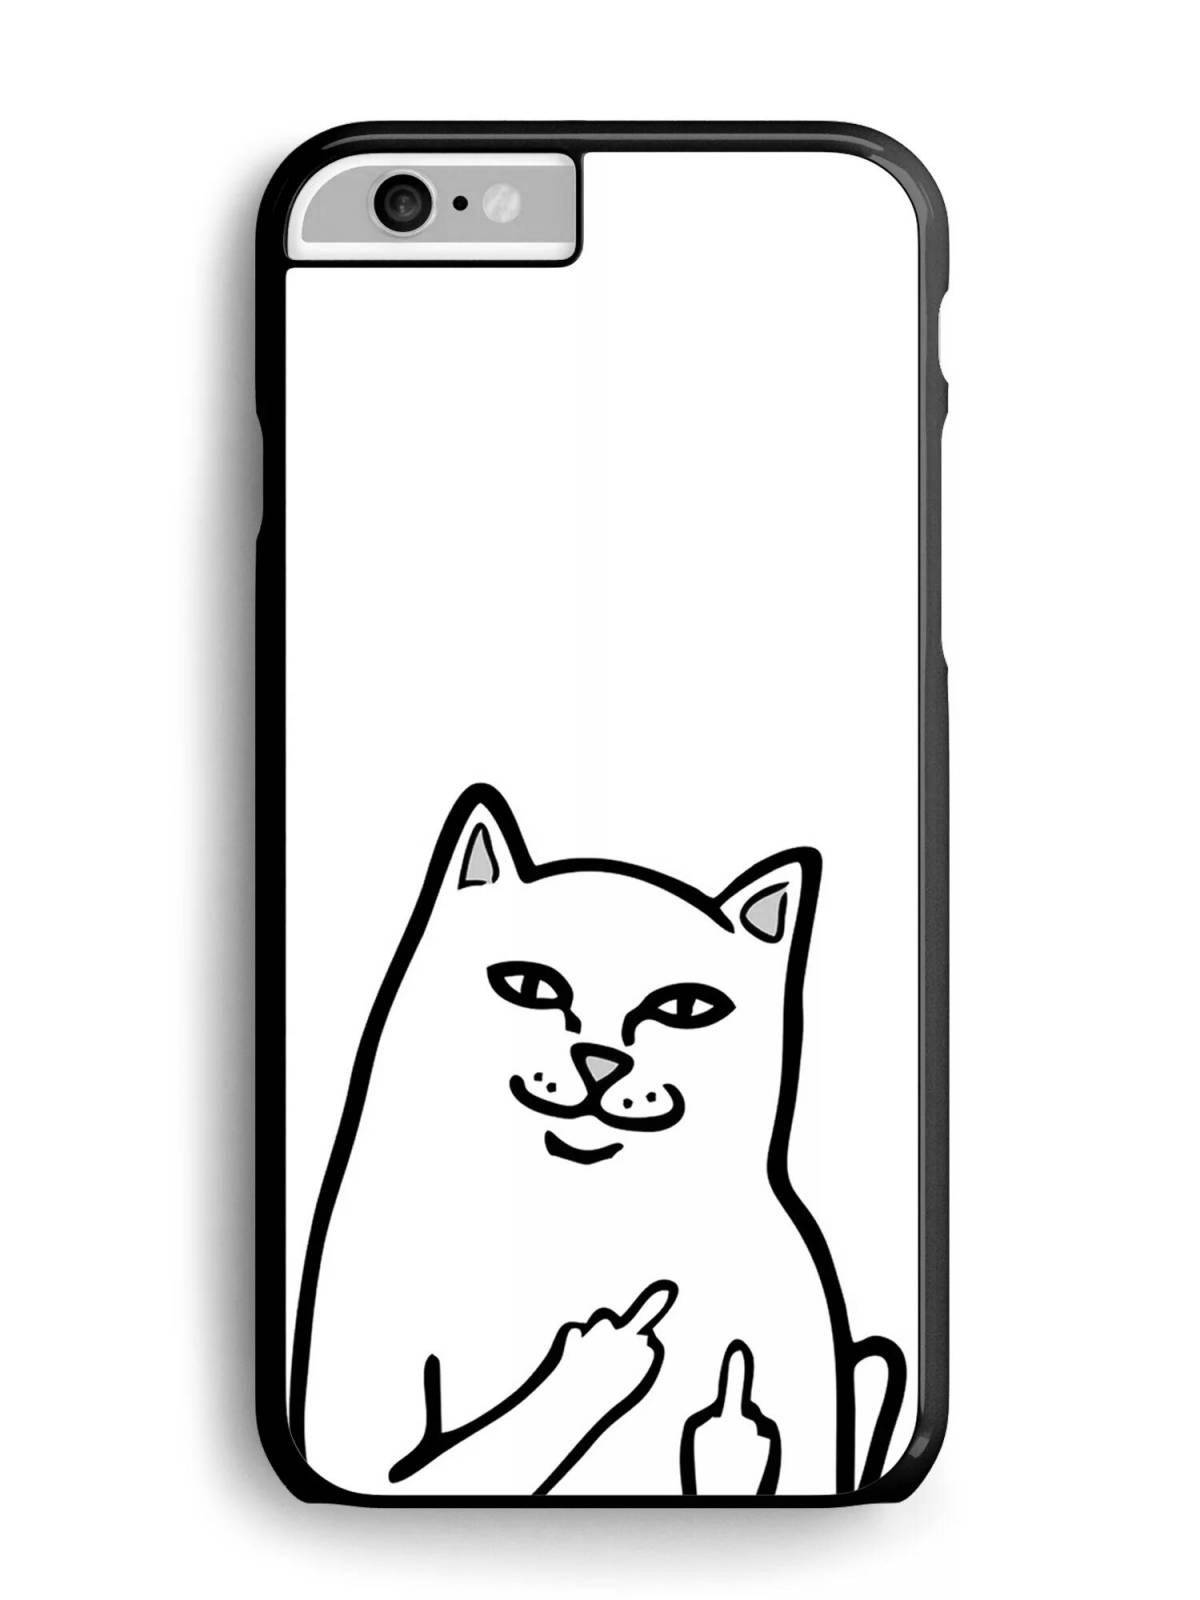 Colouring ideas for colorful phone cases